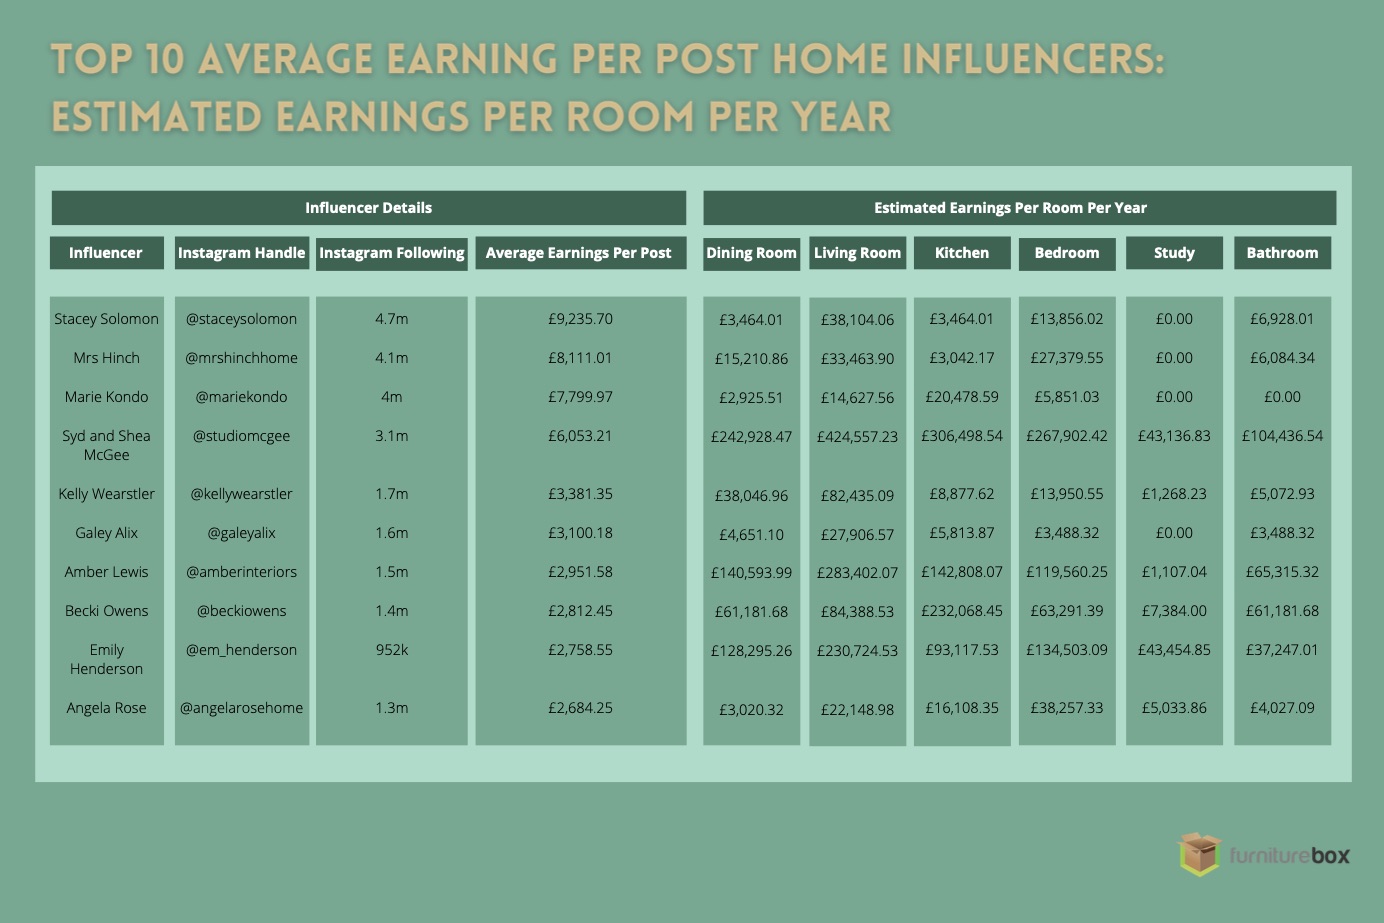 Table showing the earnings per room for the top 10 Instagram interior design influencers.